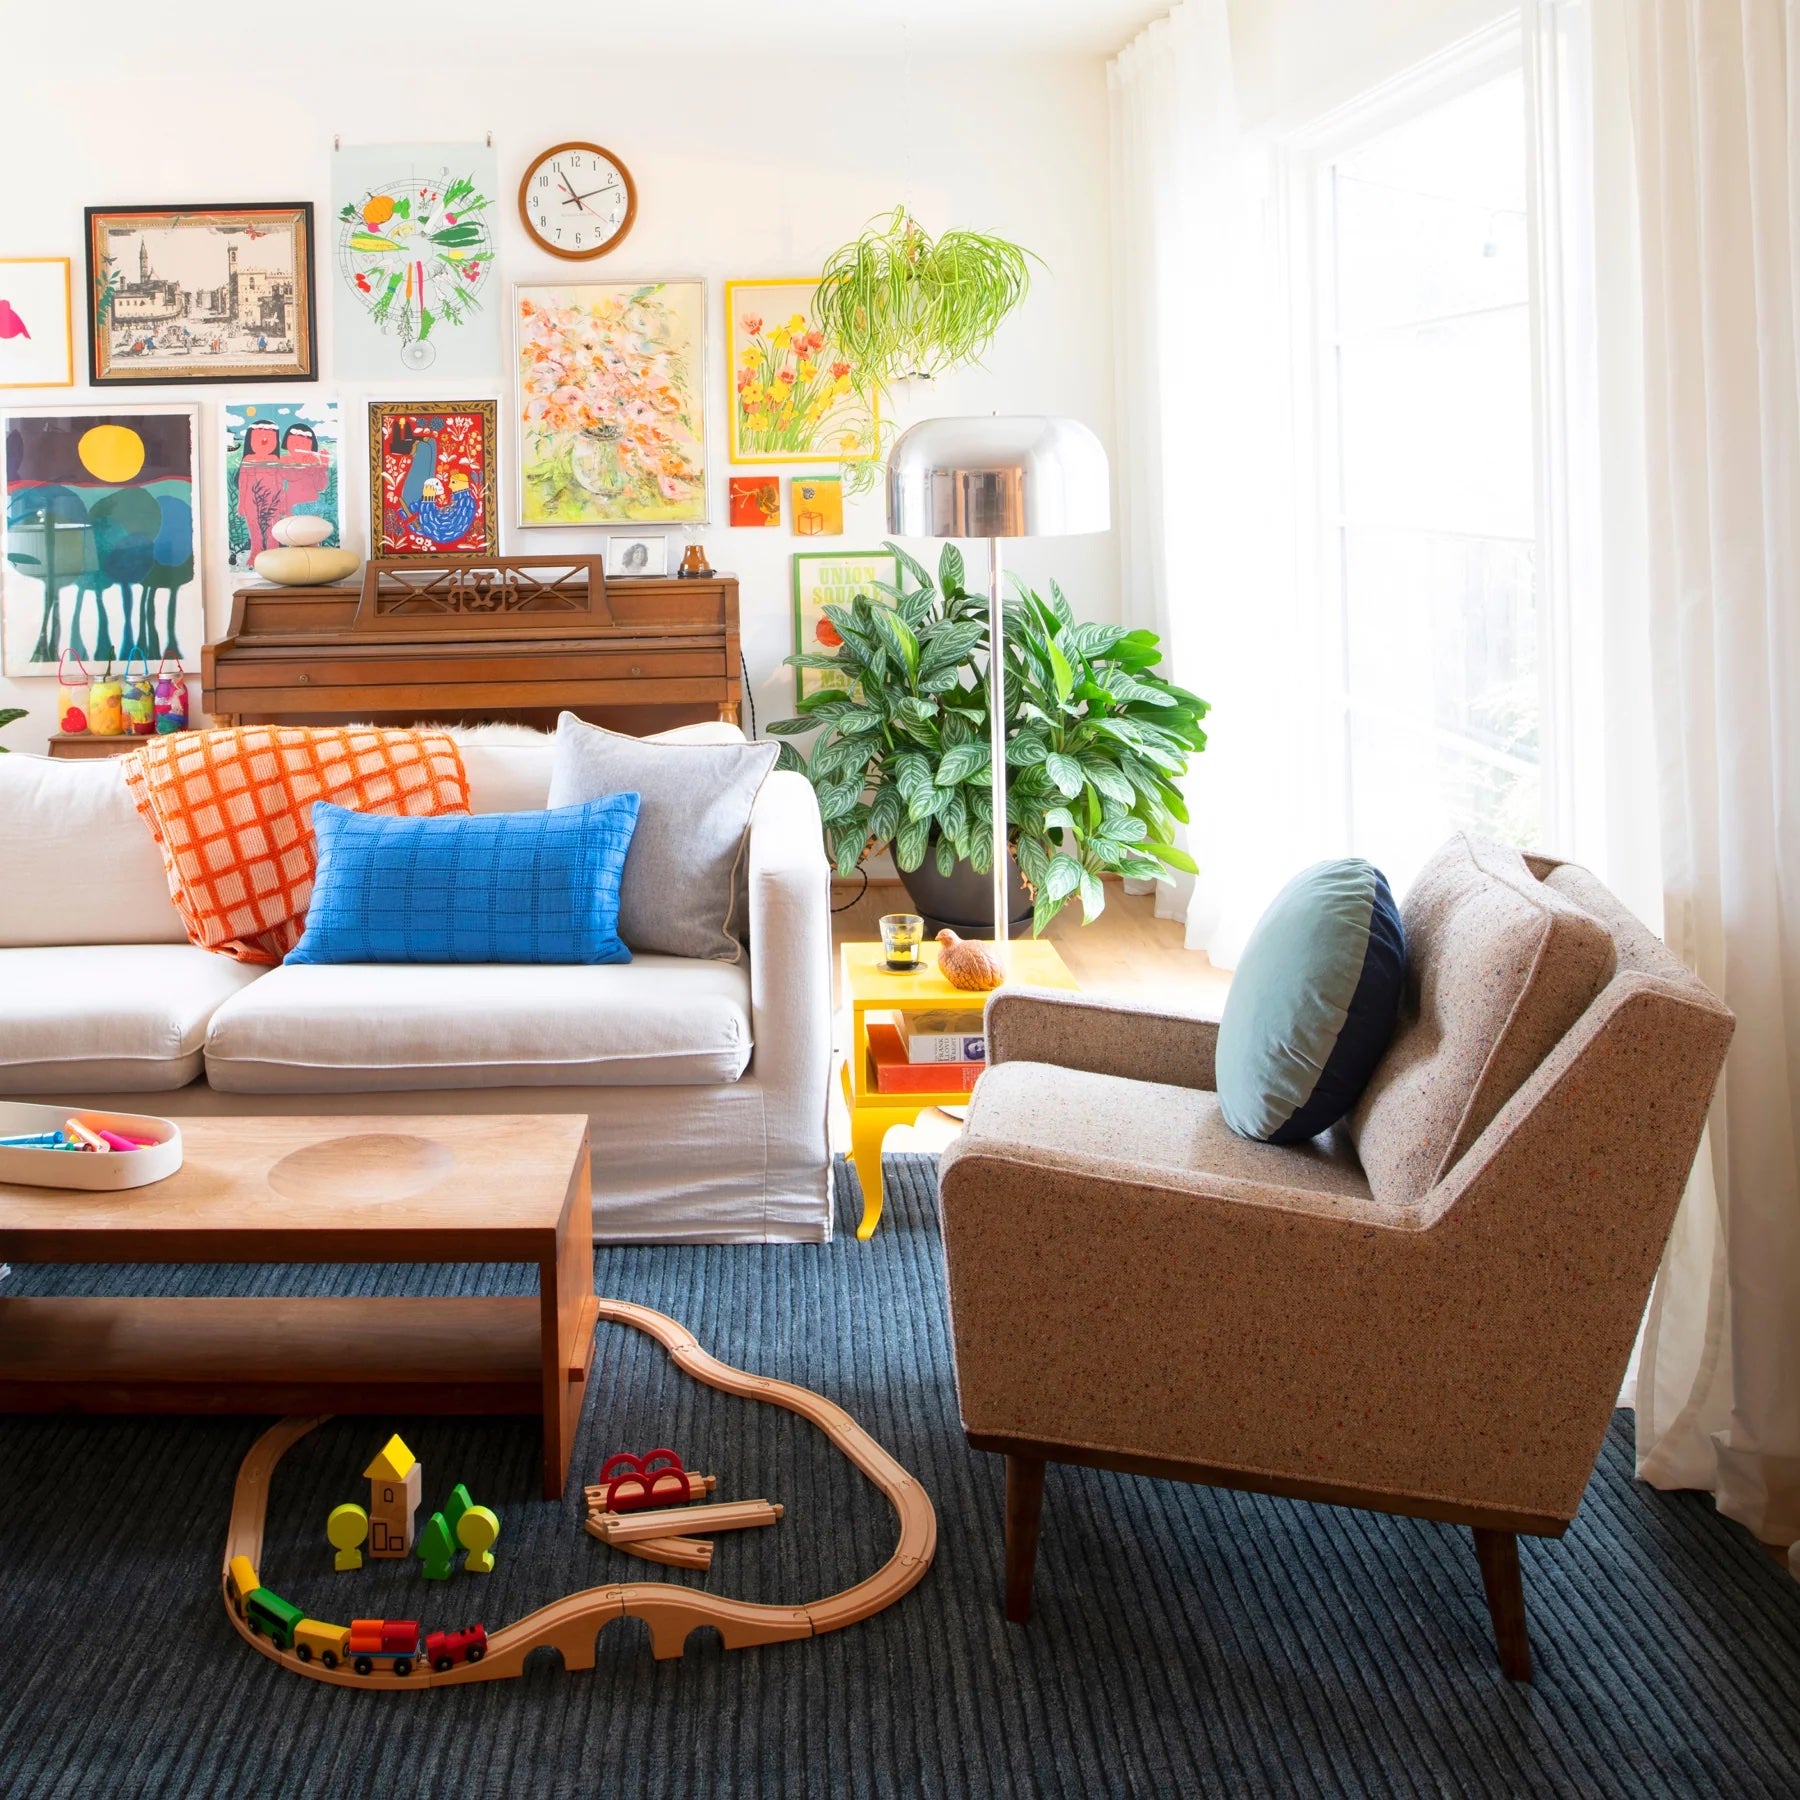 A cozy living room features a white sofa with colorful pillows, adjacent to a beige armchair. A wooden coffee table stands between them. A toy train set is on the floor. The walls are adorned with various artworks, and green plants add to the room's lively atmosphere.